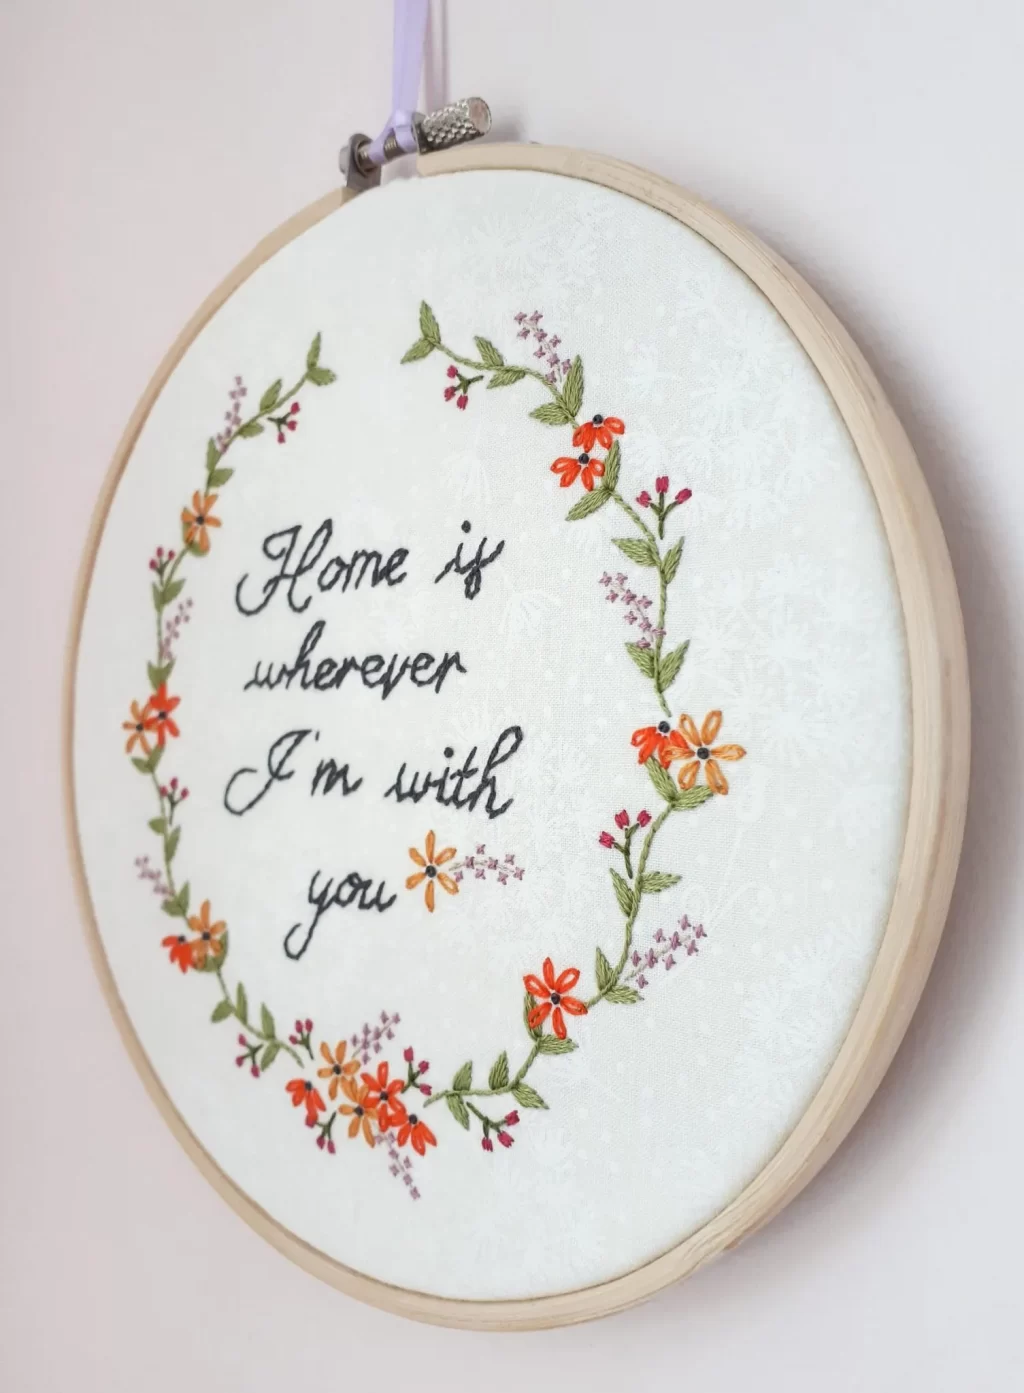 DIY Embroidery Projects: A Fun and Personal Touch to Your Home Decor